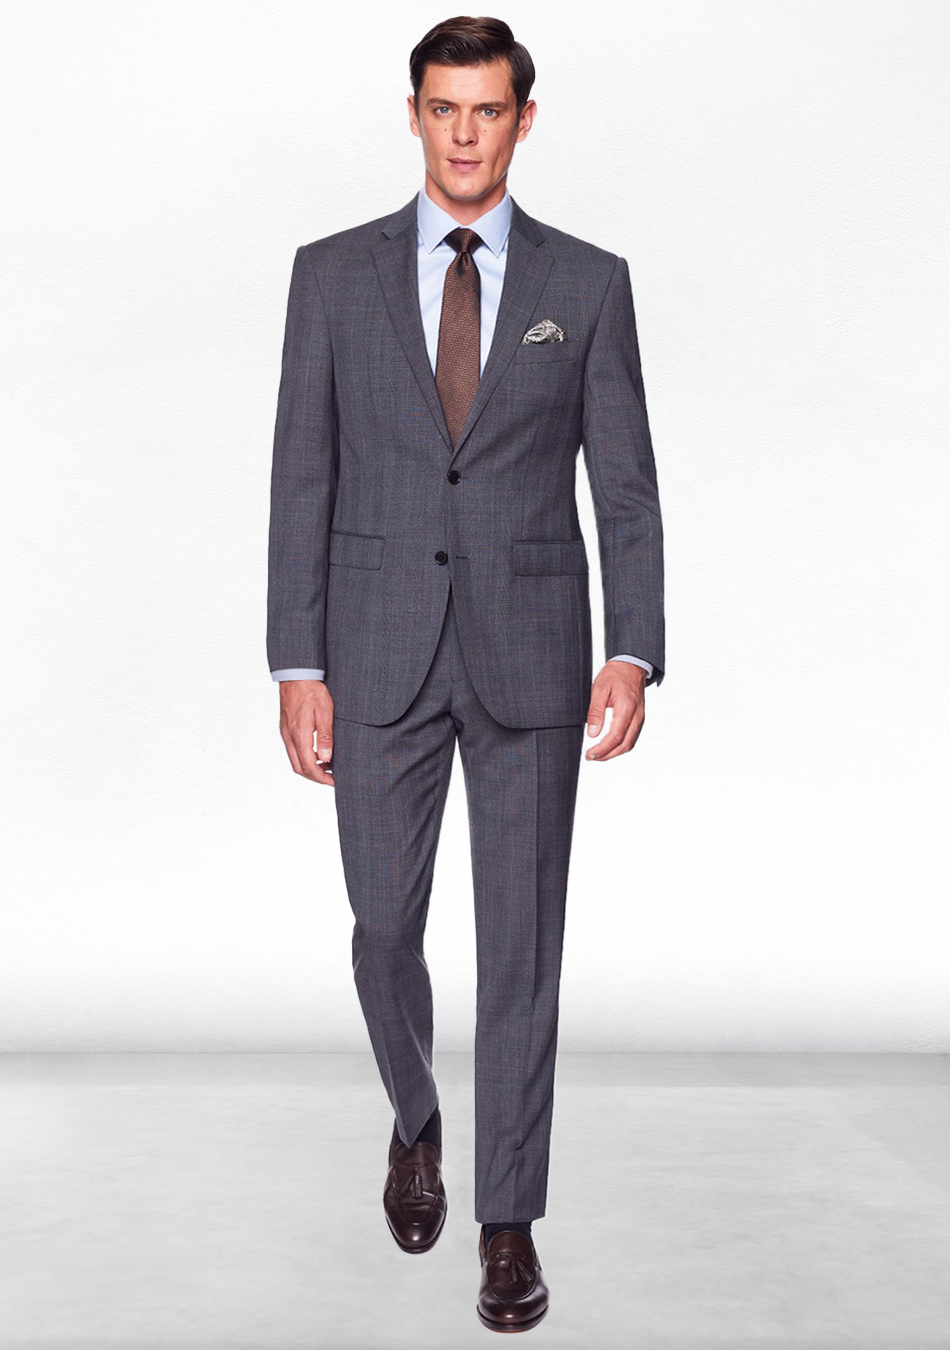 Charcoal grey suit, blue dress shirt, brown tie, and brown loafers